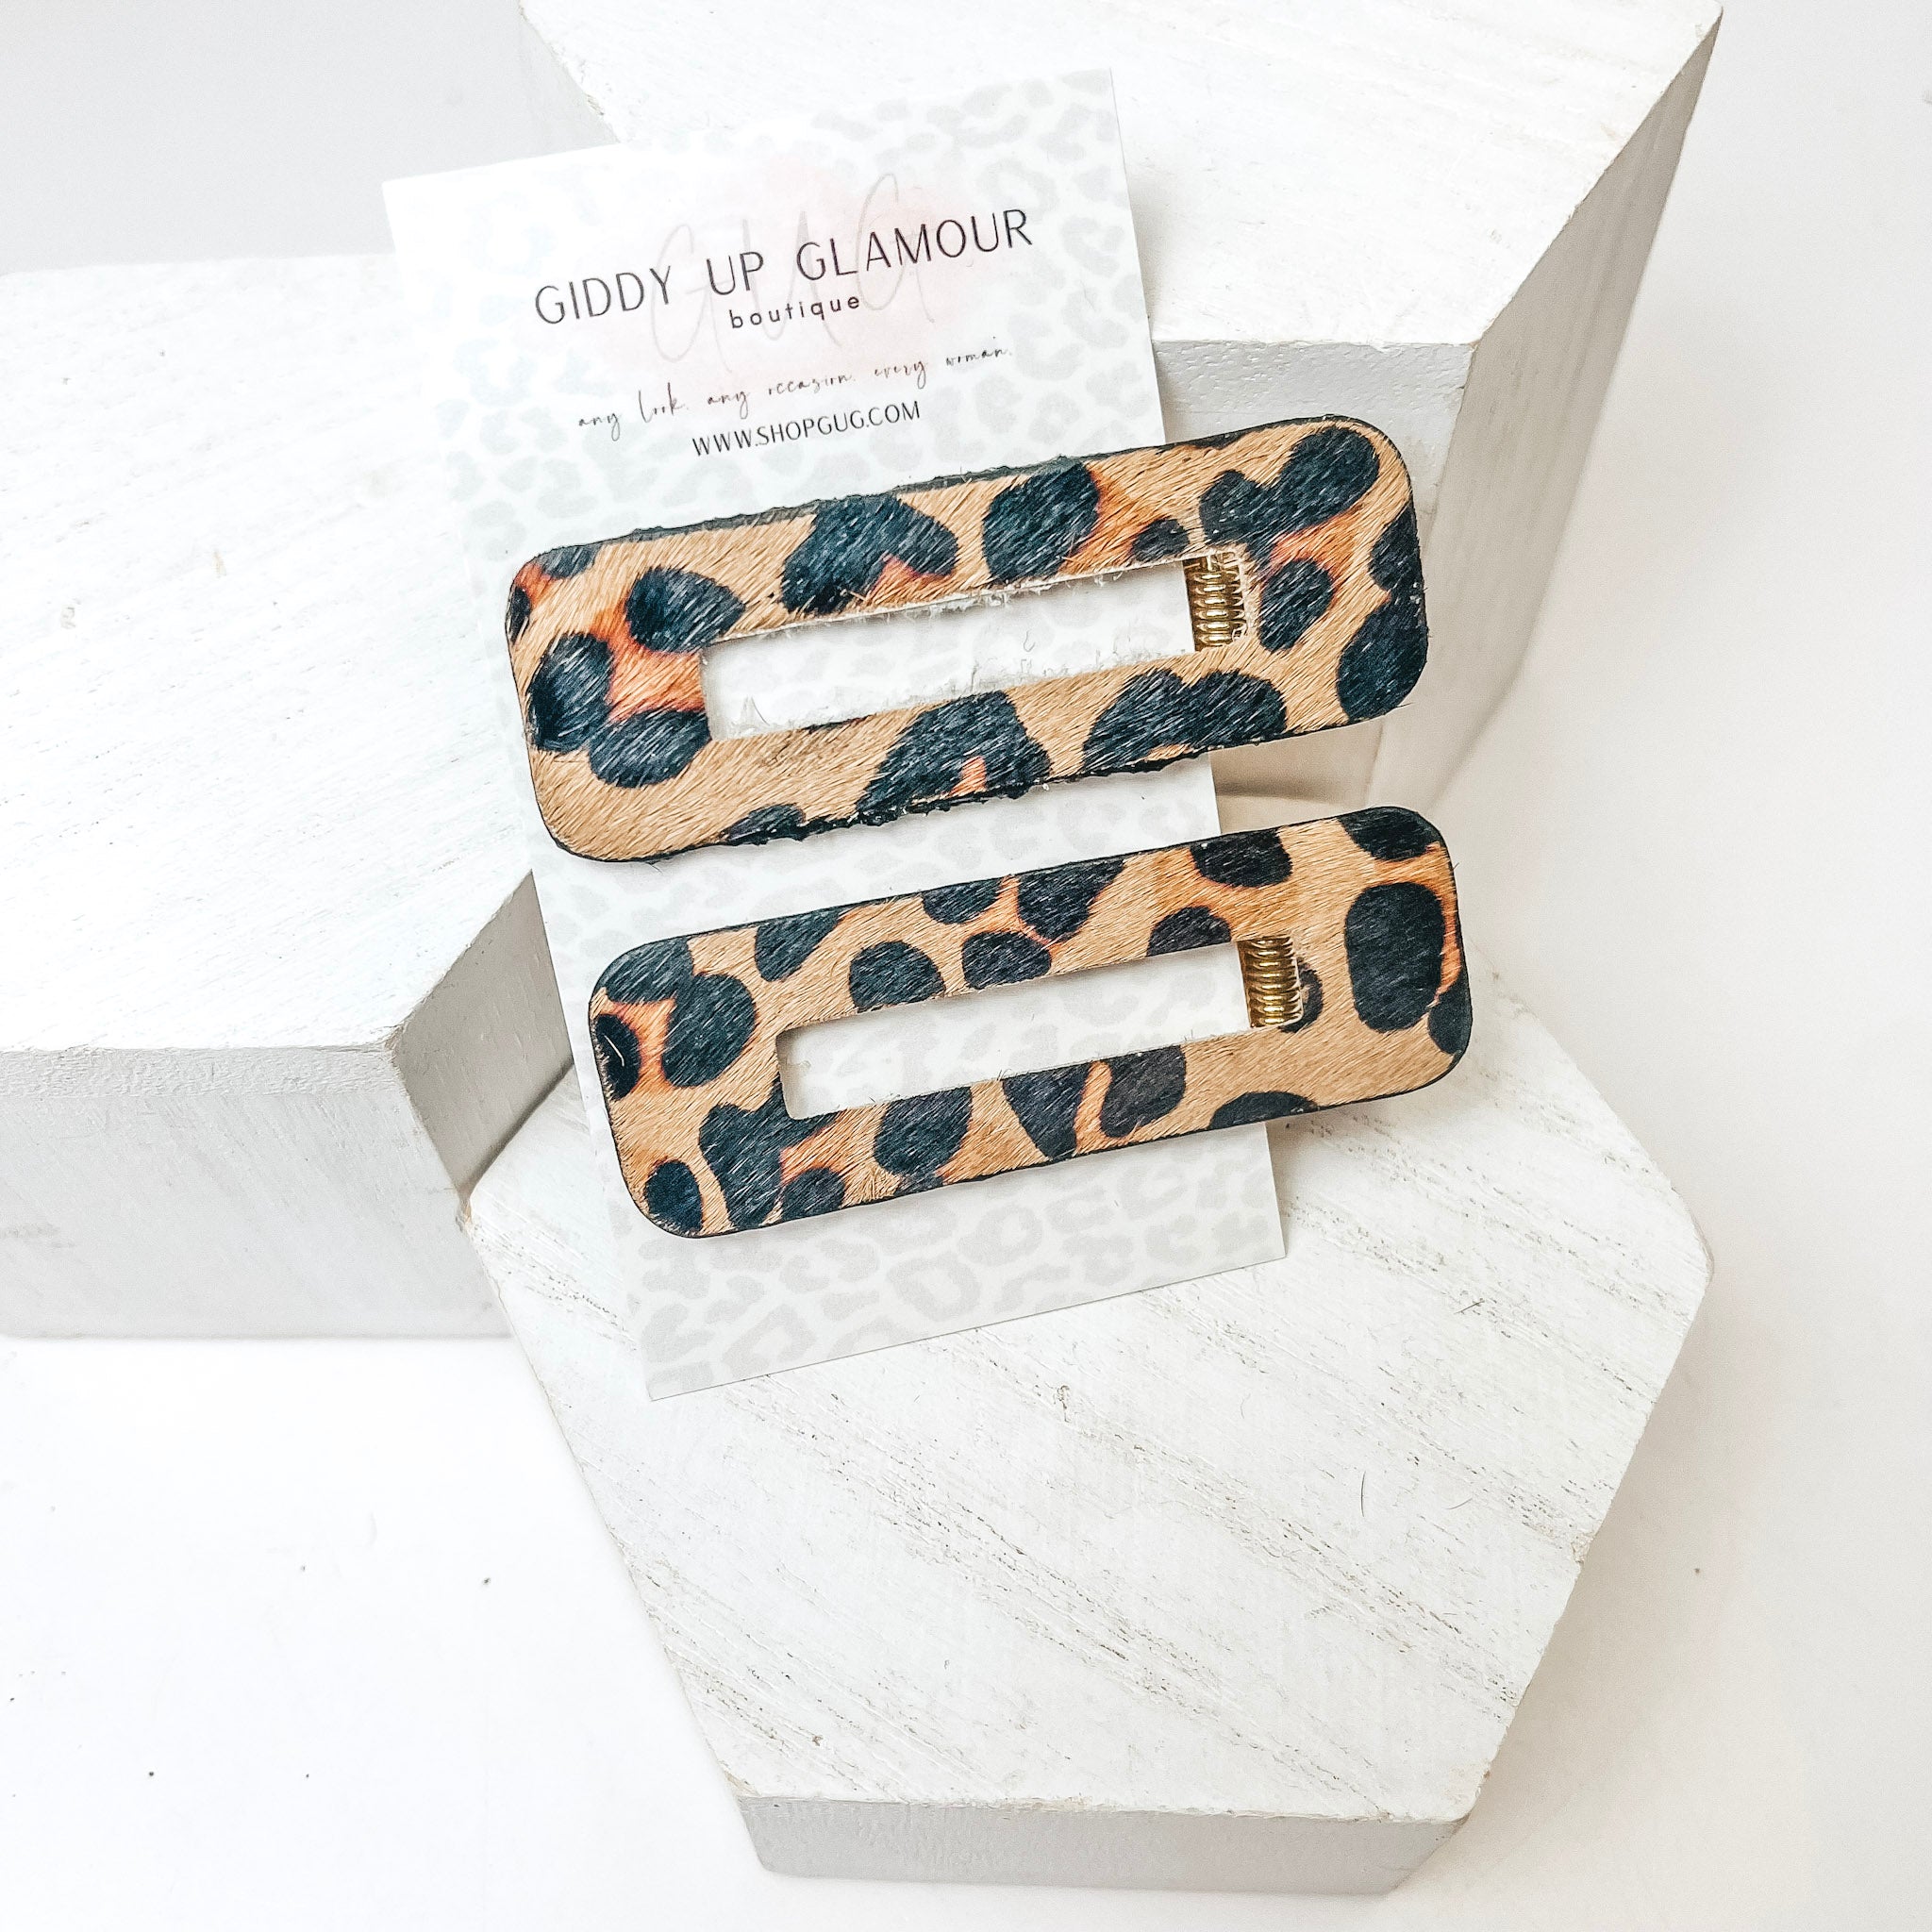 Hair Clip Pair in Cheetah Print - Giddy Up Glamour Boutique